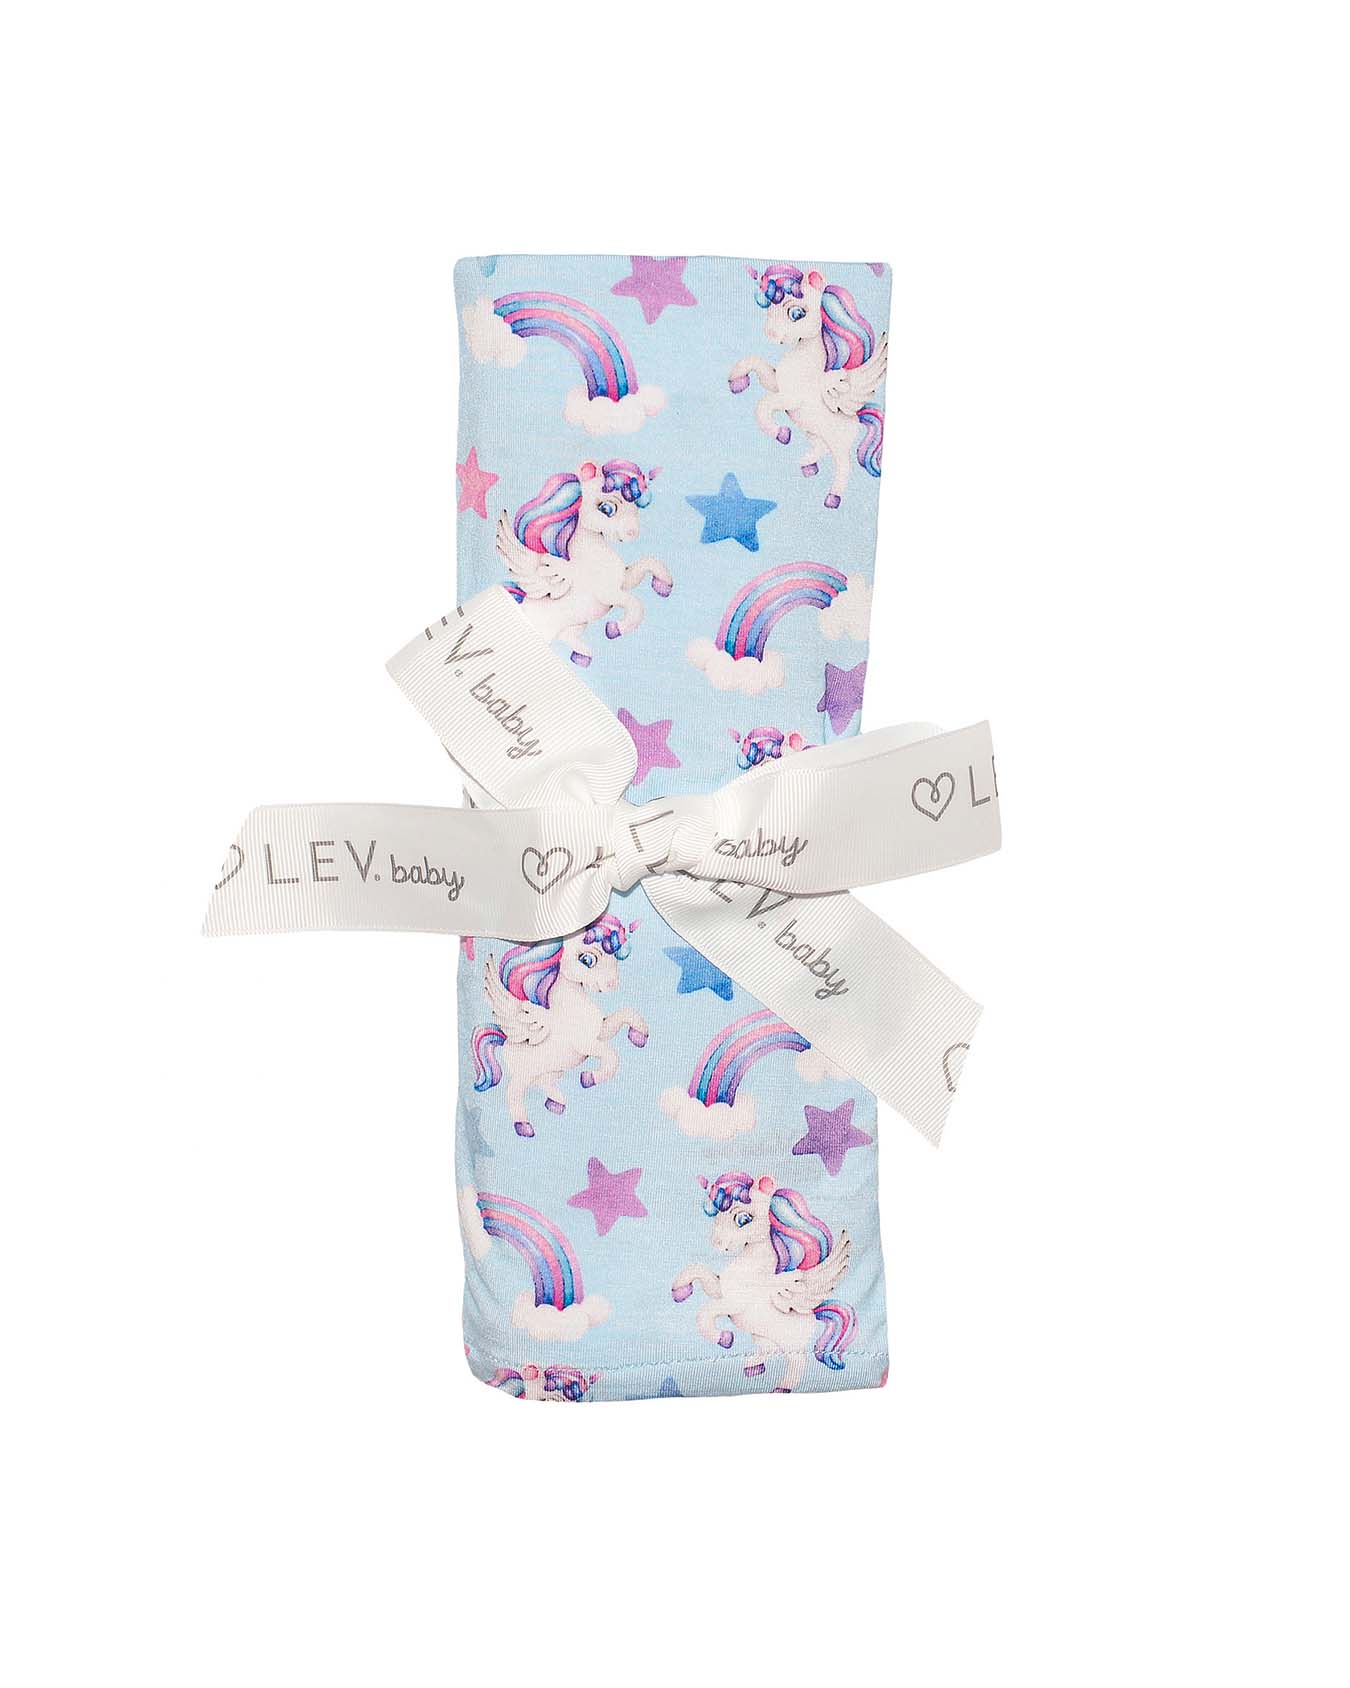 Lev Baby Unicorn Swaddle from Hannah Collection